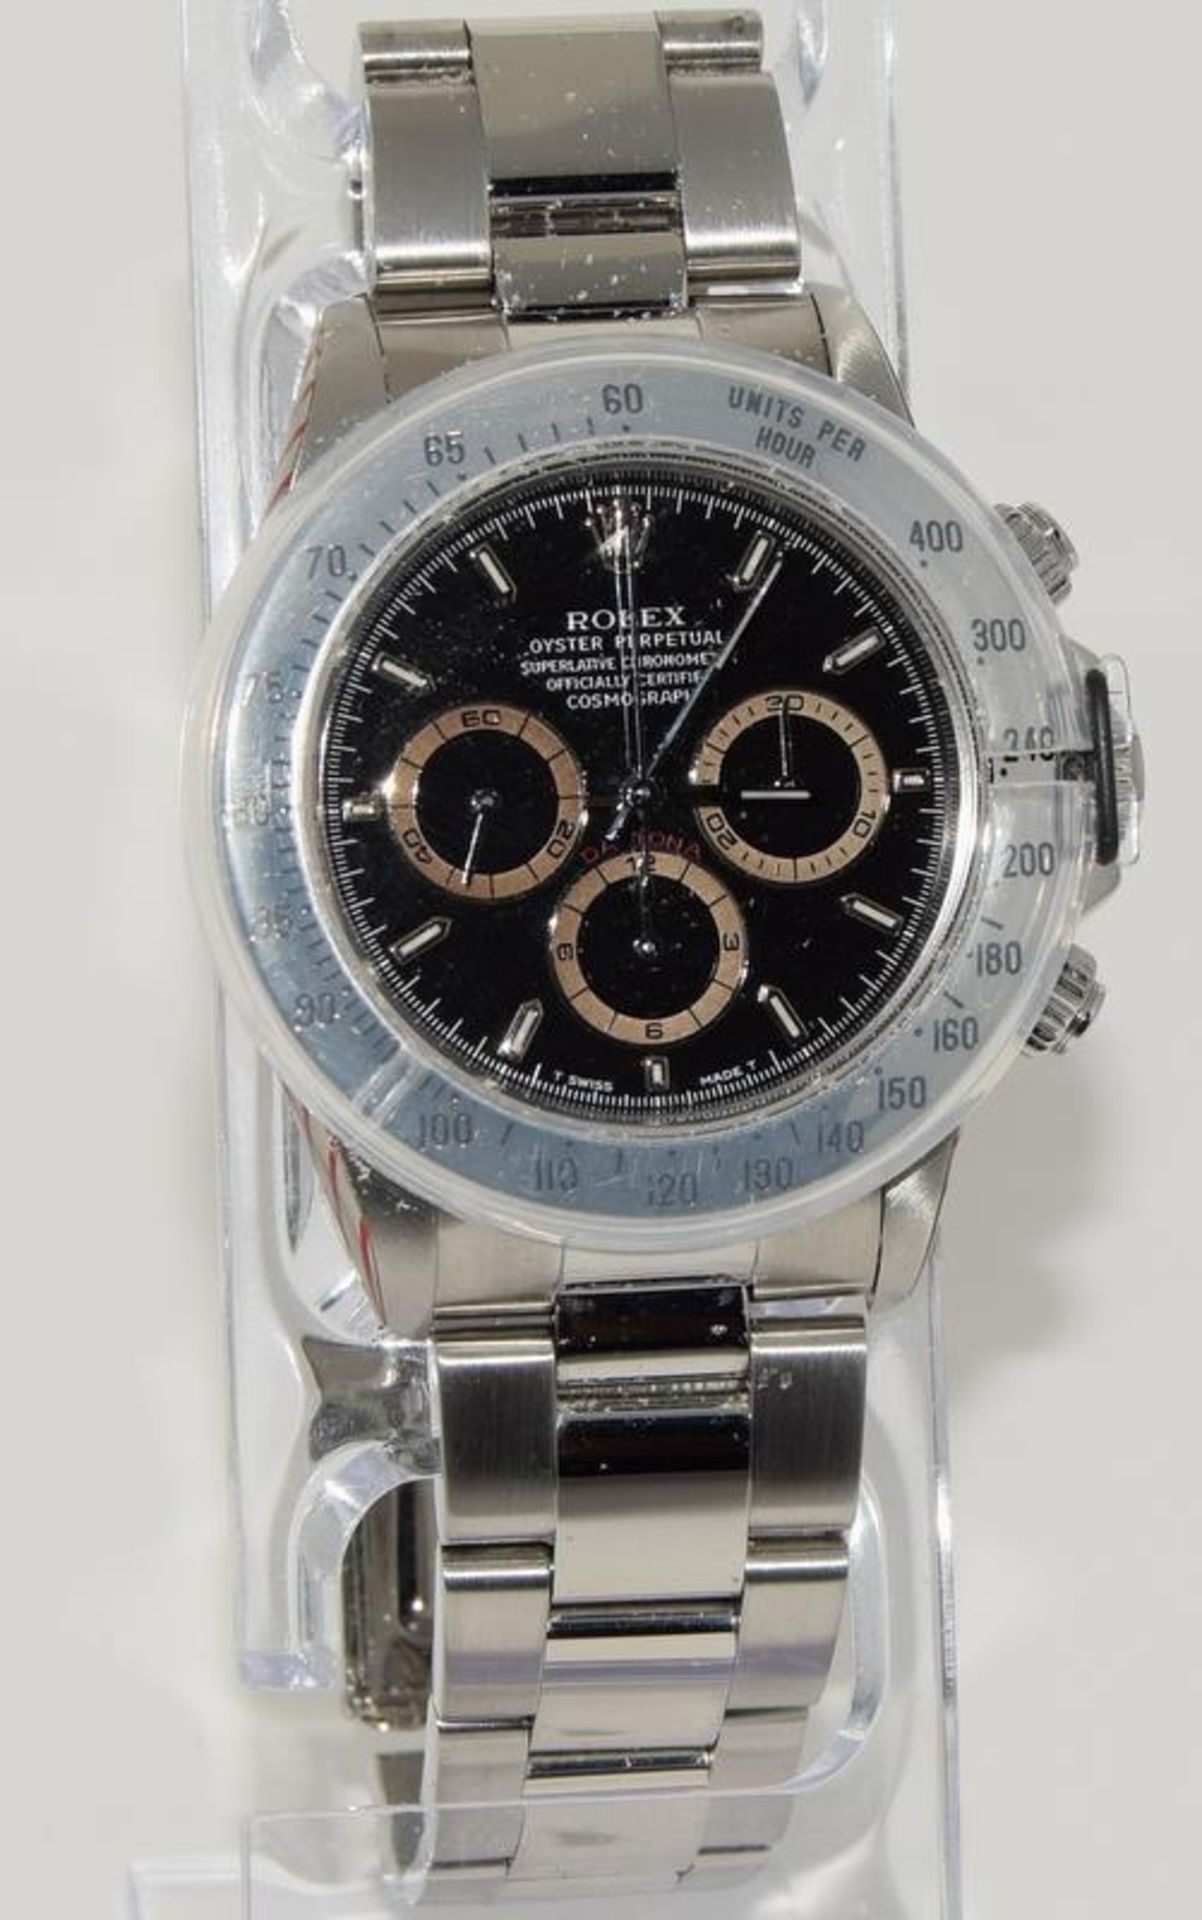 1997 Rolex Stainless steel Daytona with black dial, Model no. 16520, Box and Papers. (ref 16) - Image 3 of 10